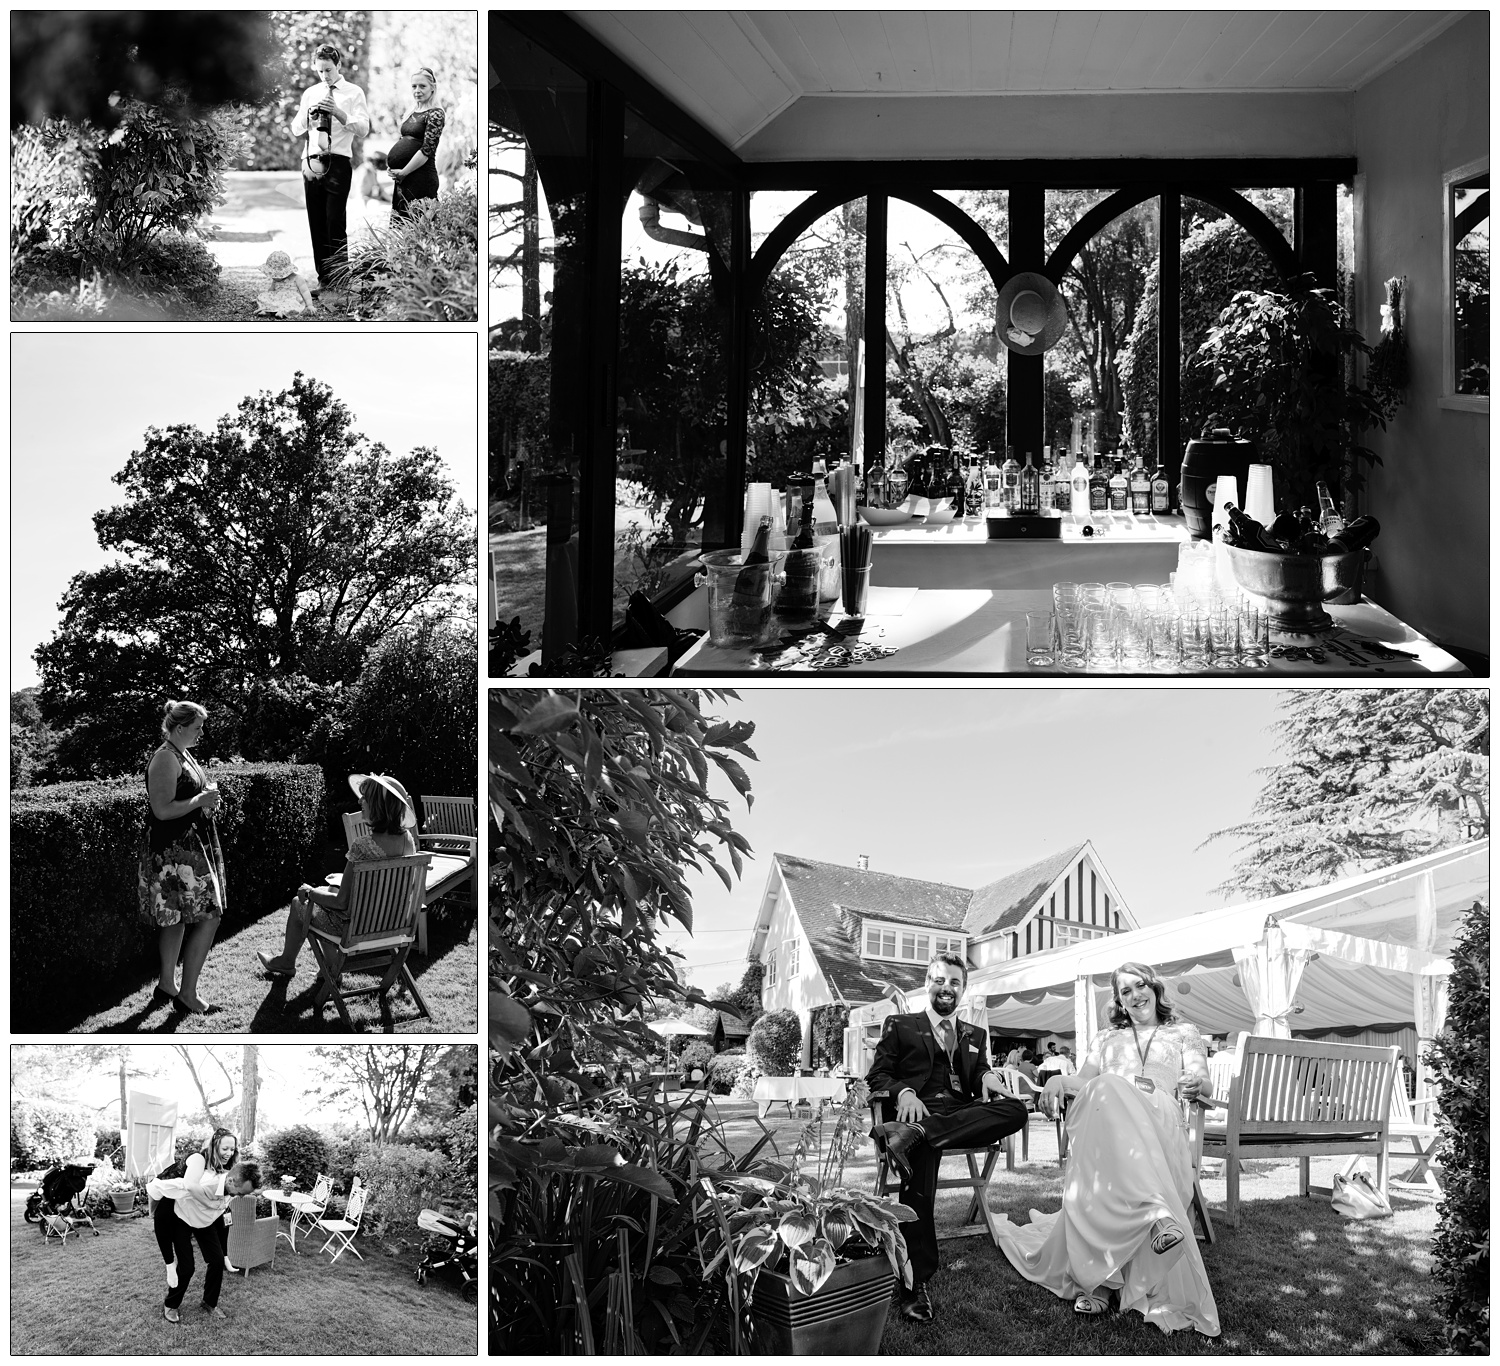 Reportage black and white photographs of a wedding reception in a garden. A bar has been set up in a conservatory.